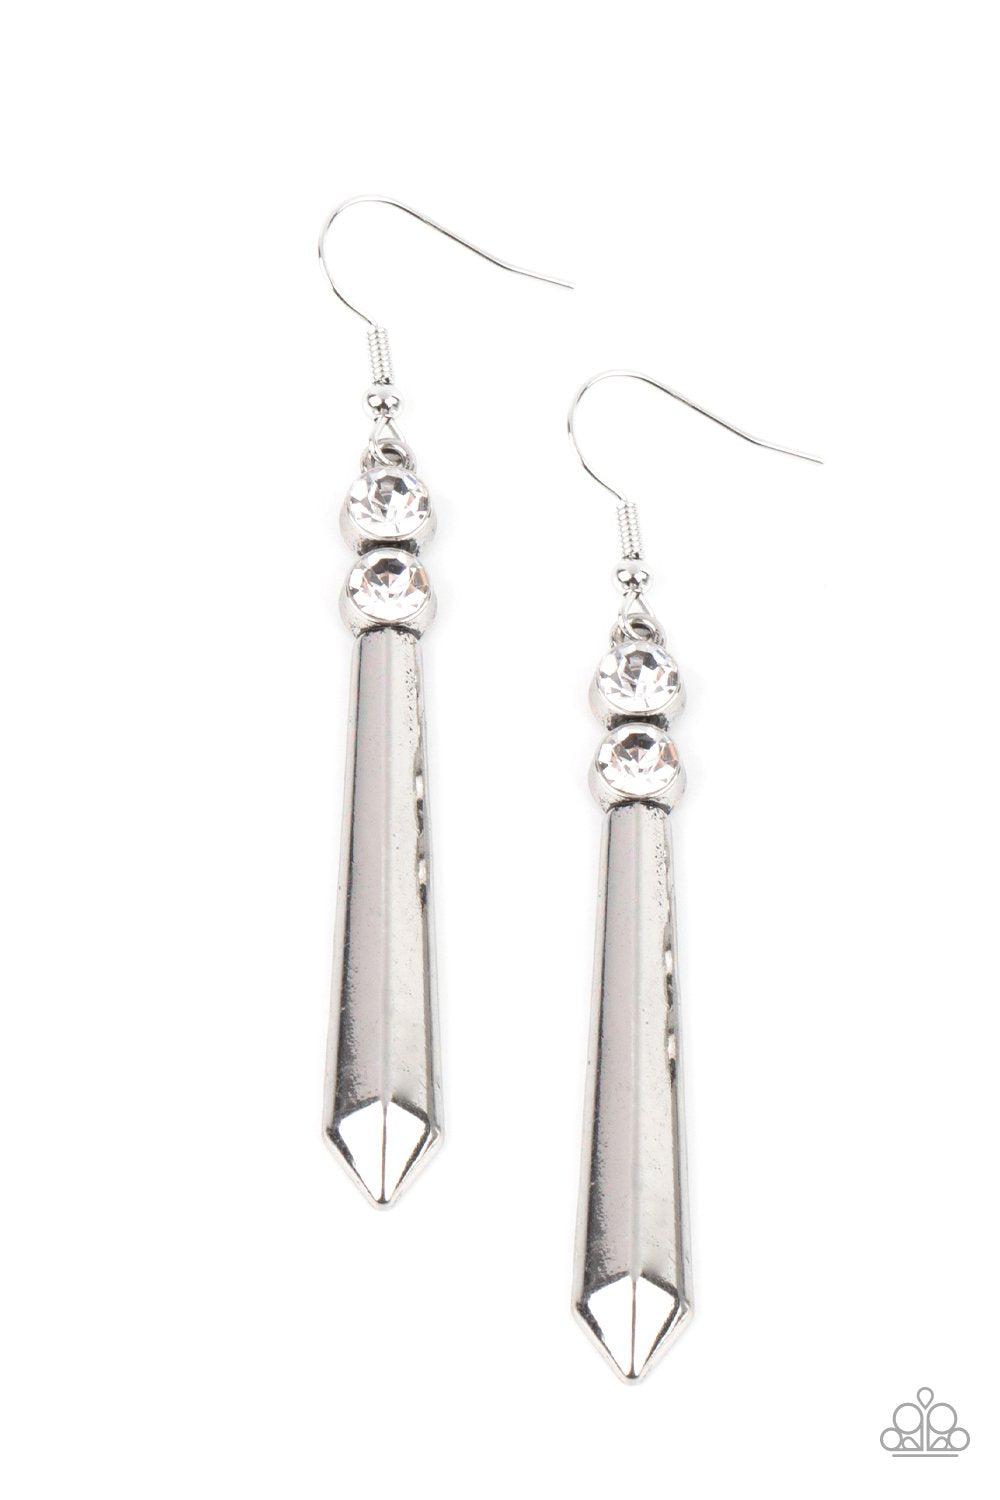 Sparkle Stream White Rhinestone and Silver Earrings - Paparazzi Accessories- lightbox - CarasShop.com - $5 Jewelry by Cara Jewels